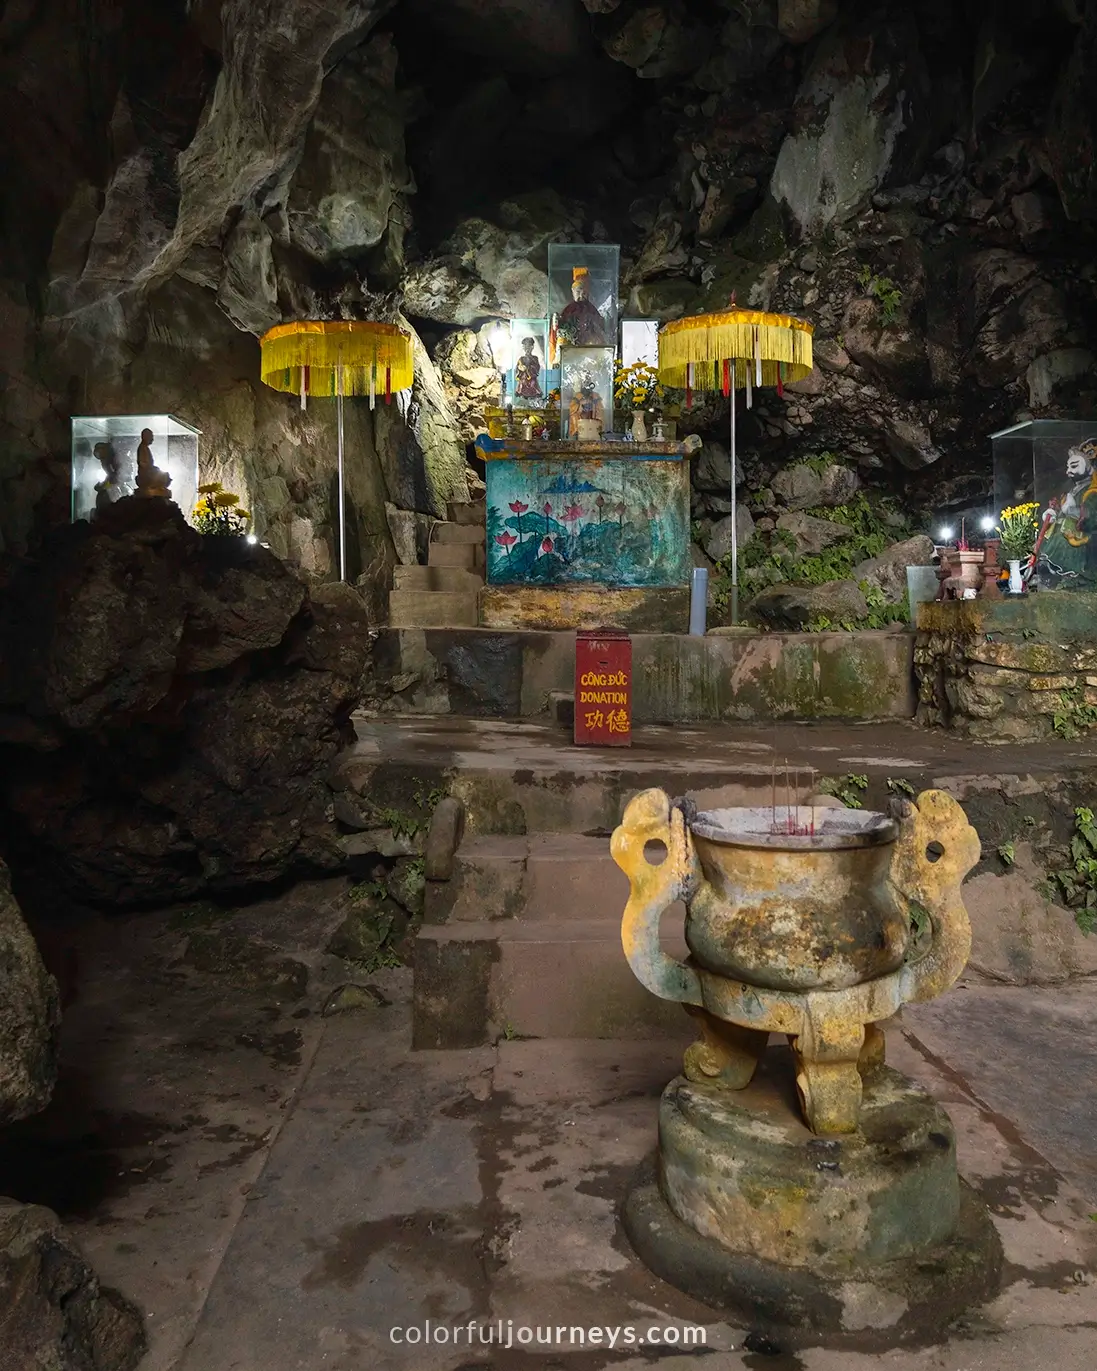 Linh Nam Cave at the Marble Mountains in Da Nang, Vietnam